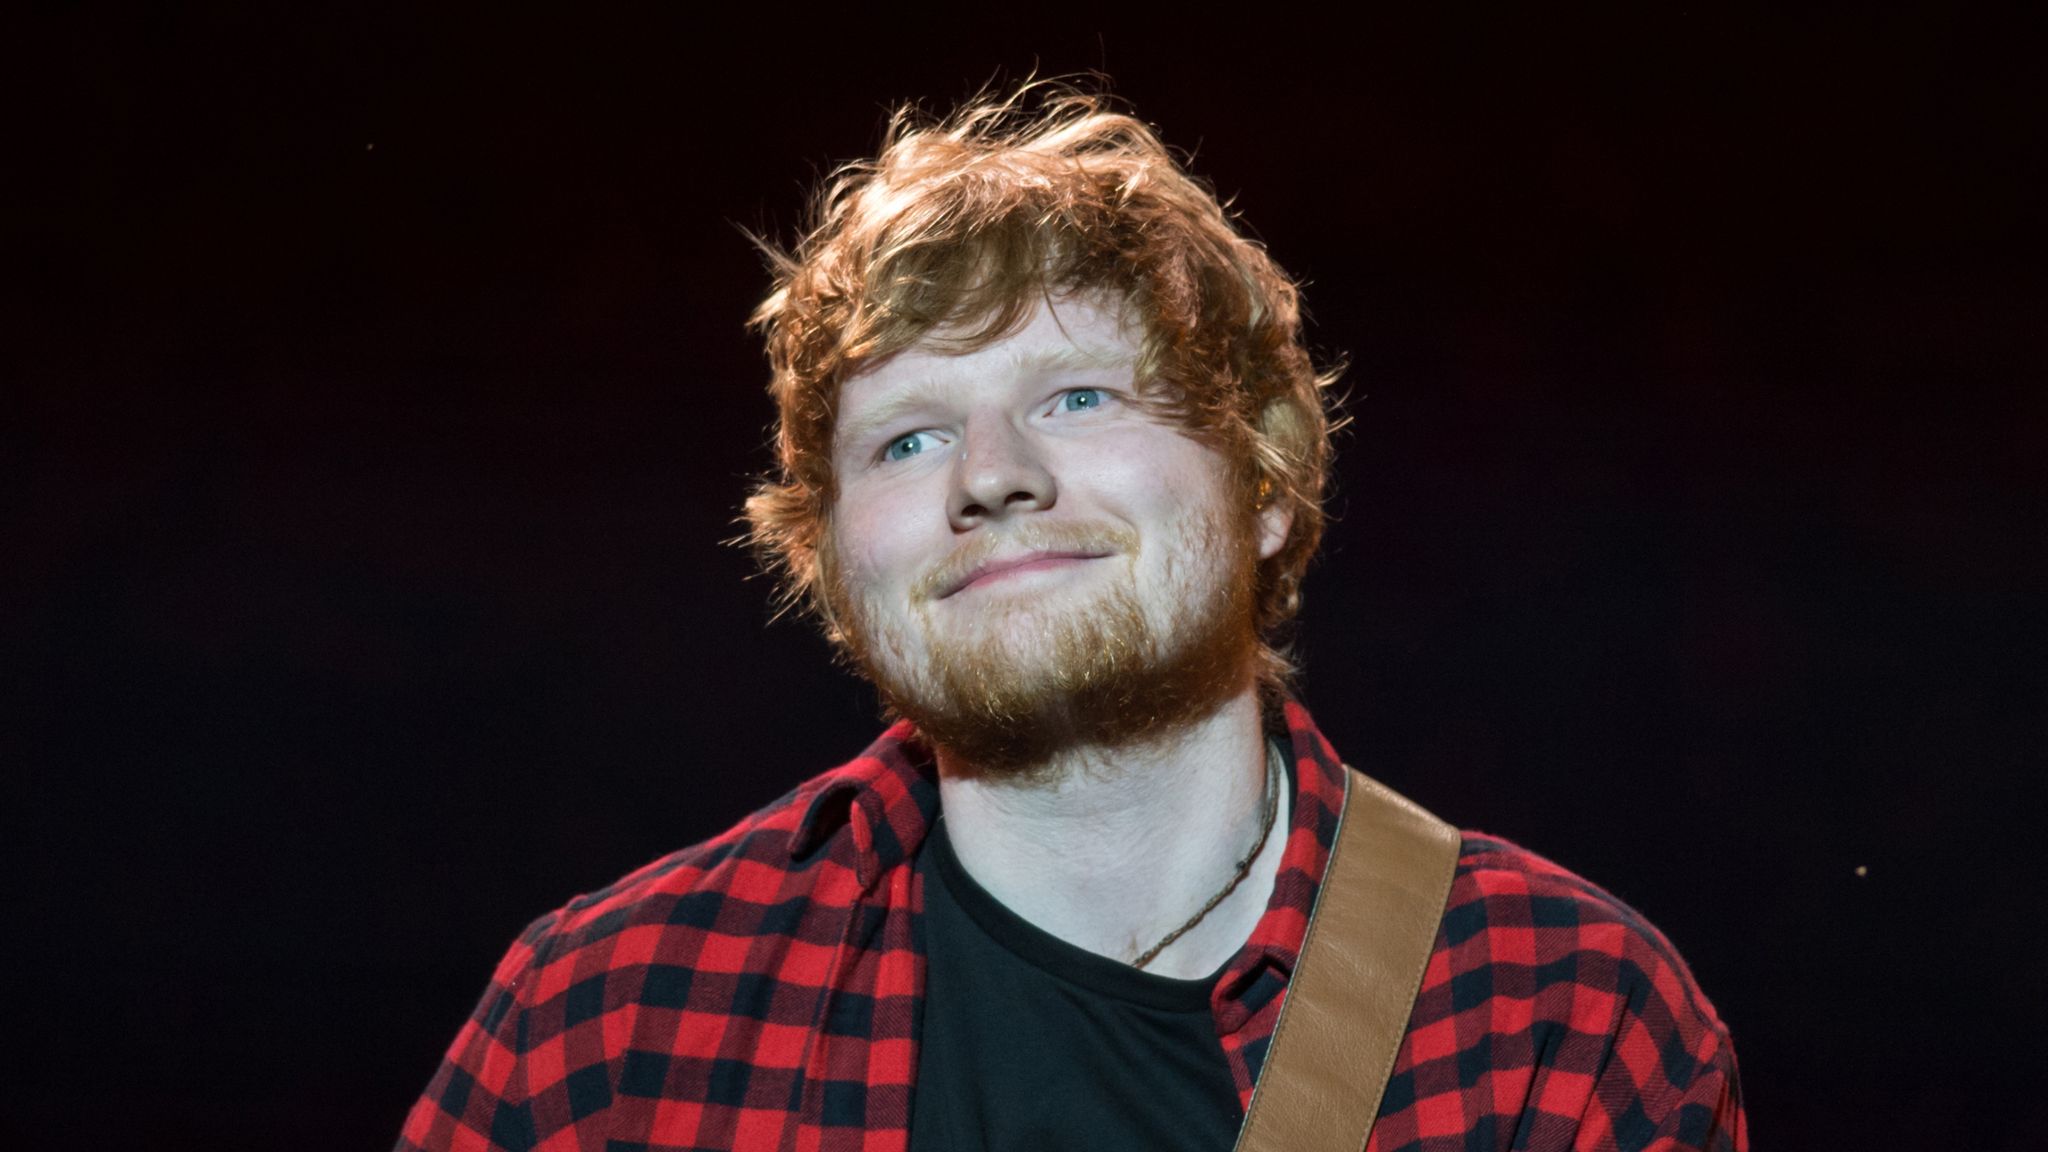 Ed Sheeran sings in Game Of Thrones cameo appearance Ents Arts News